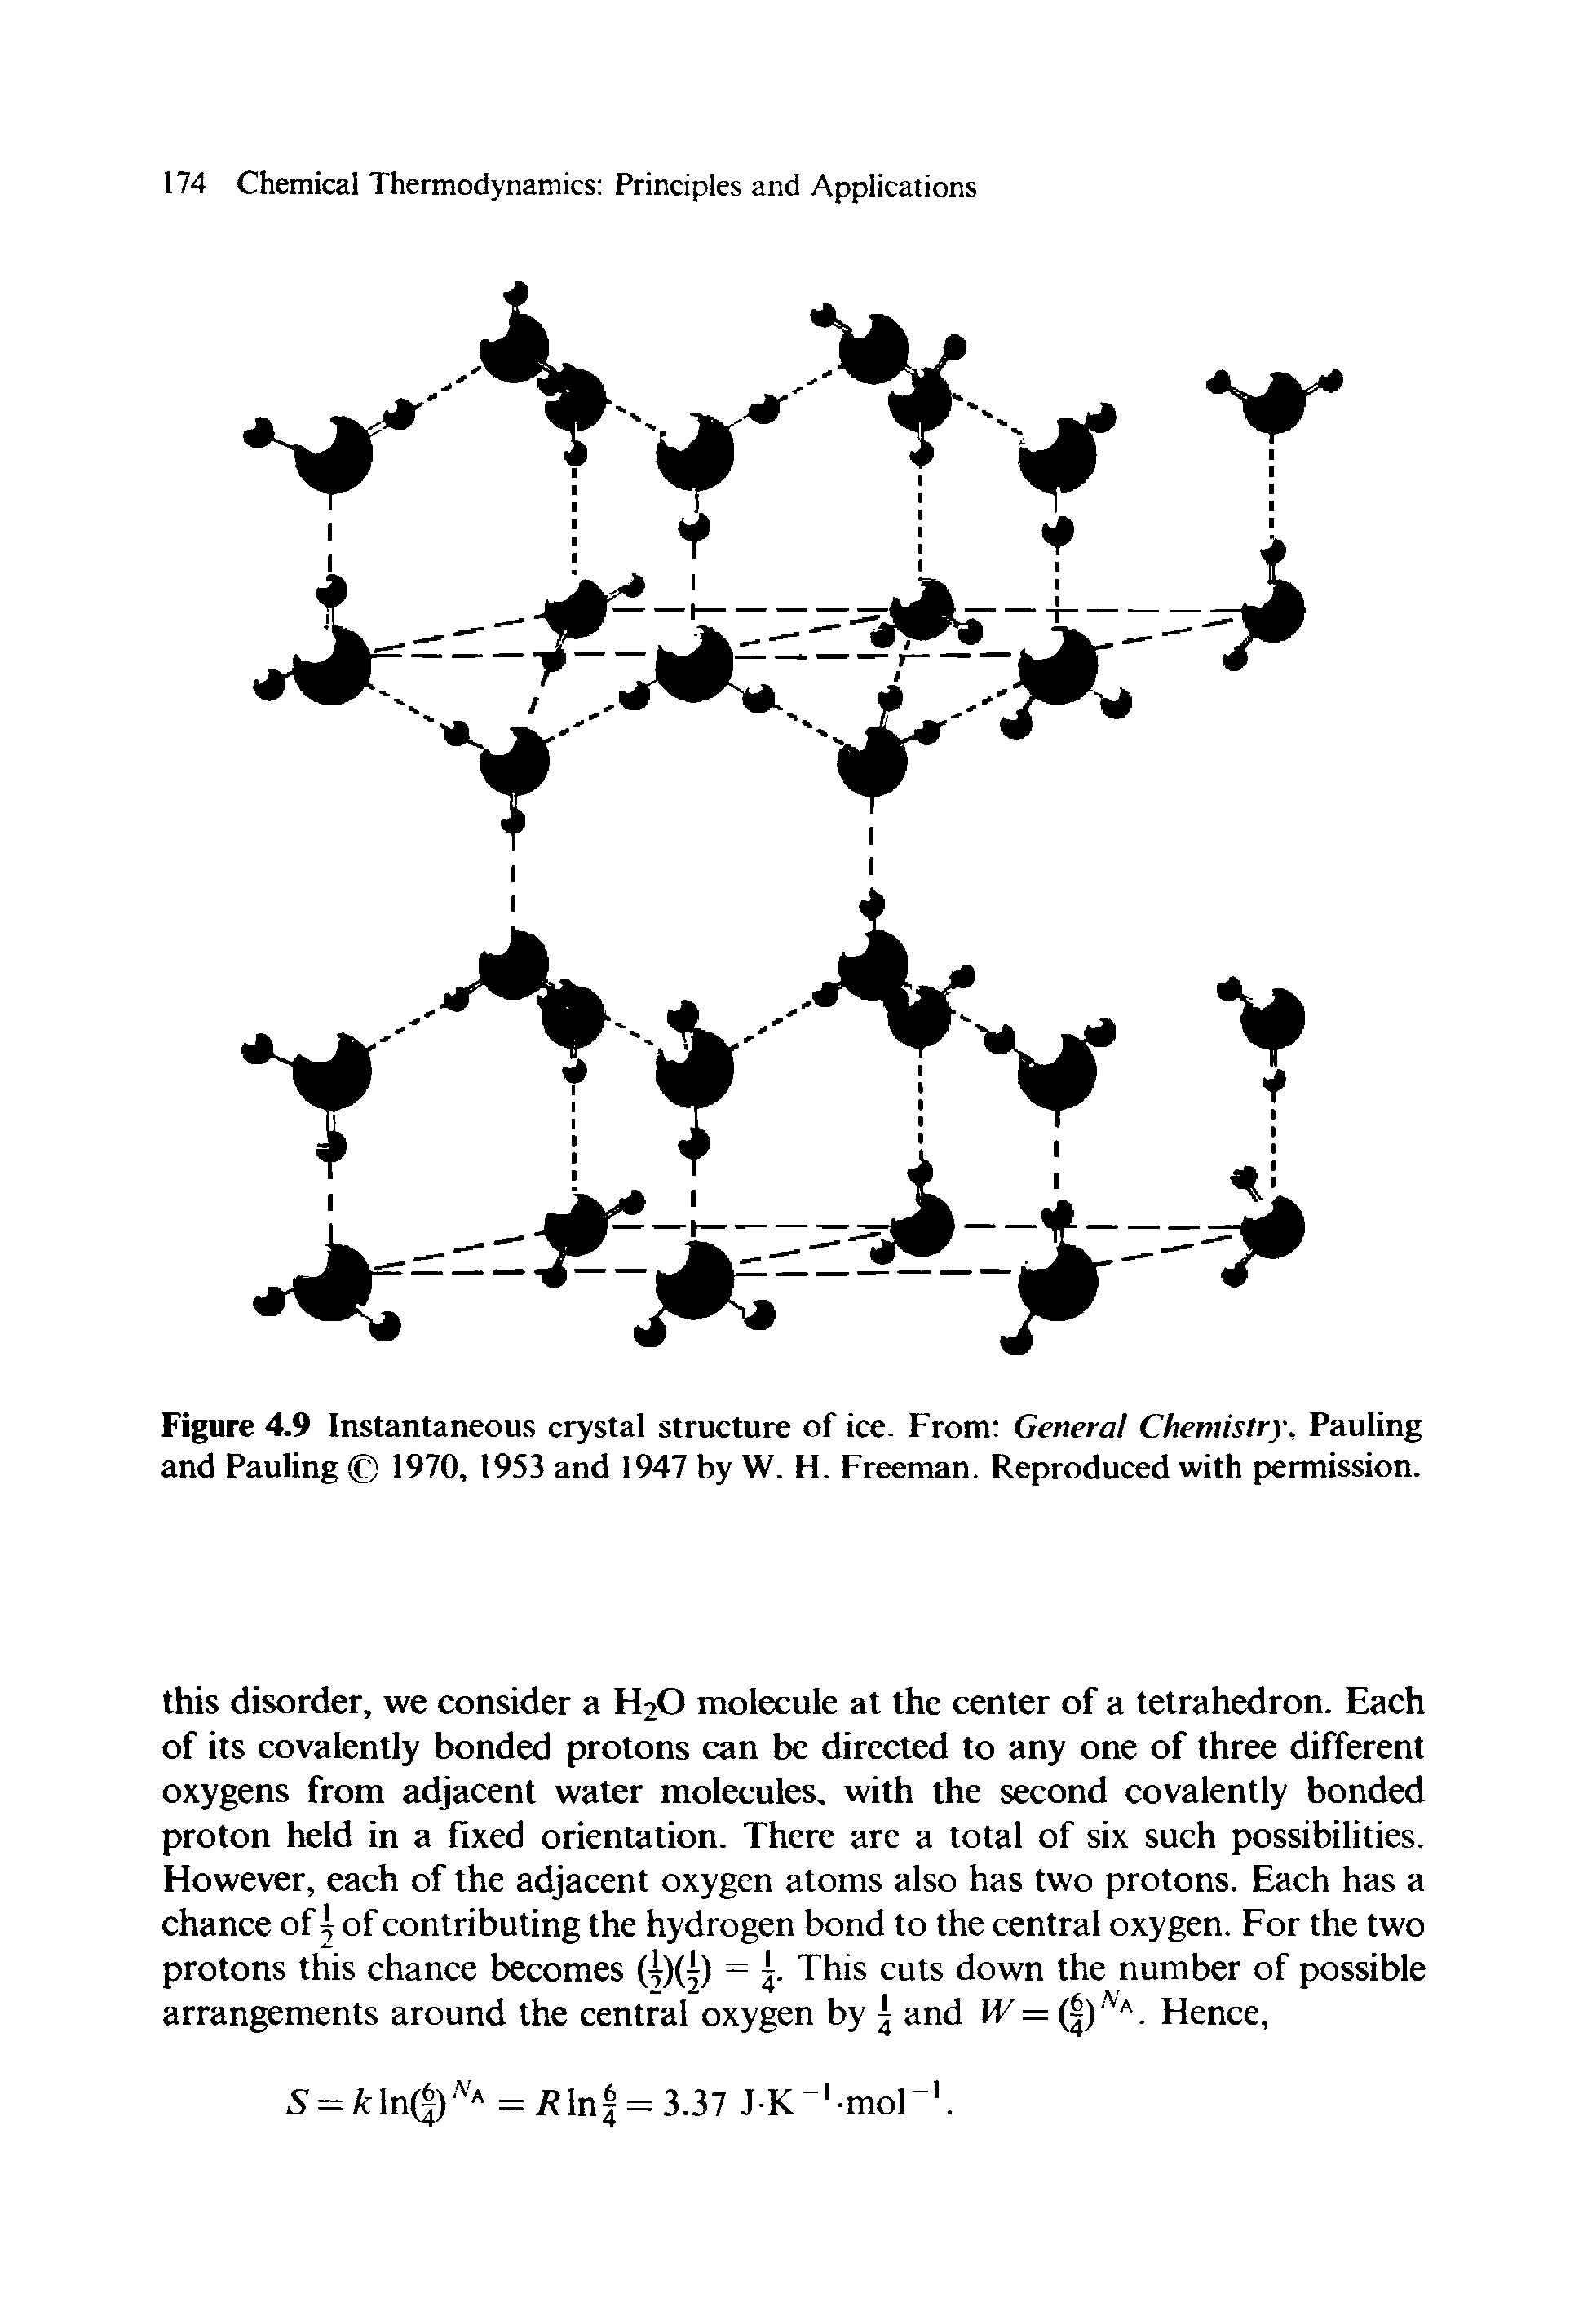 Figure 4.9 Instantaneous crystal structure of ice. From General Chemistry, Pauling and Pauling 1970, 1953 and 1947 by W. H. Freeman. Reproduced with permission.